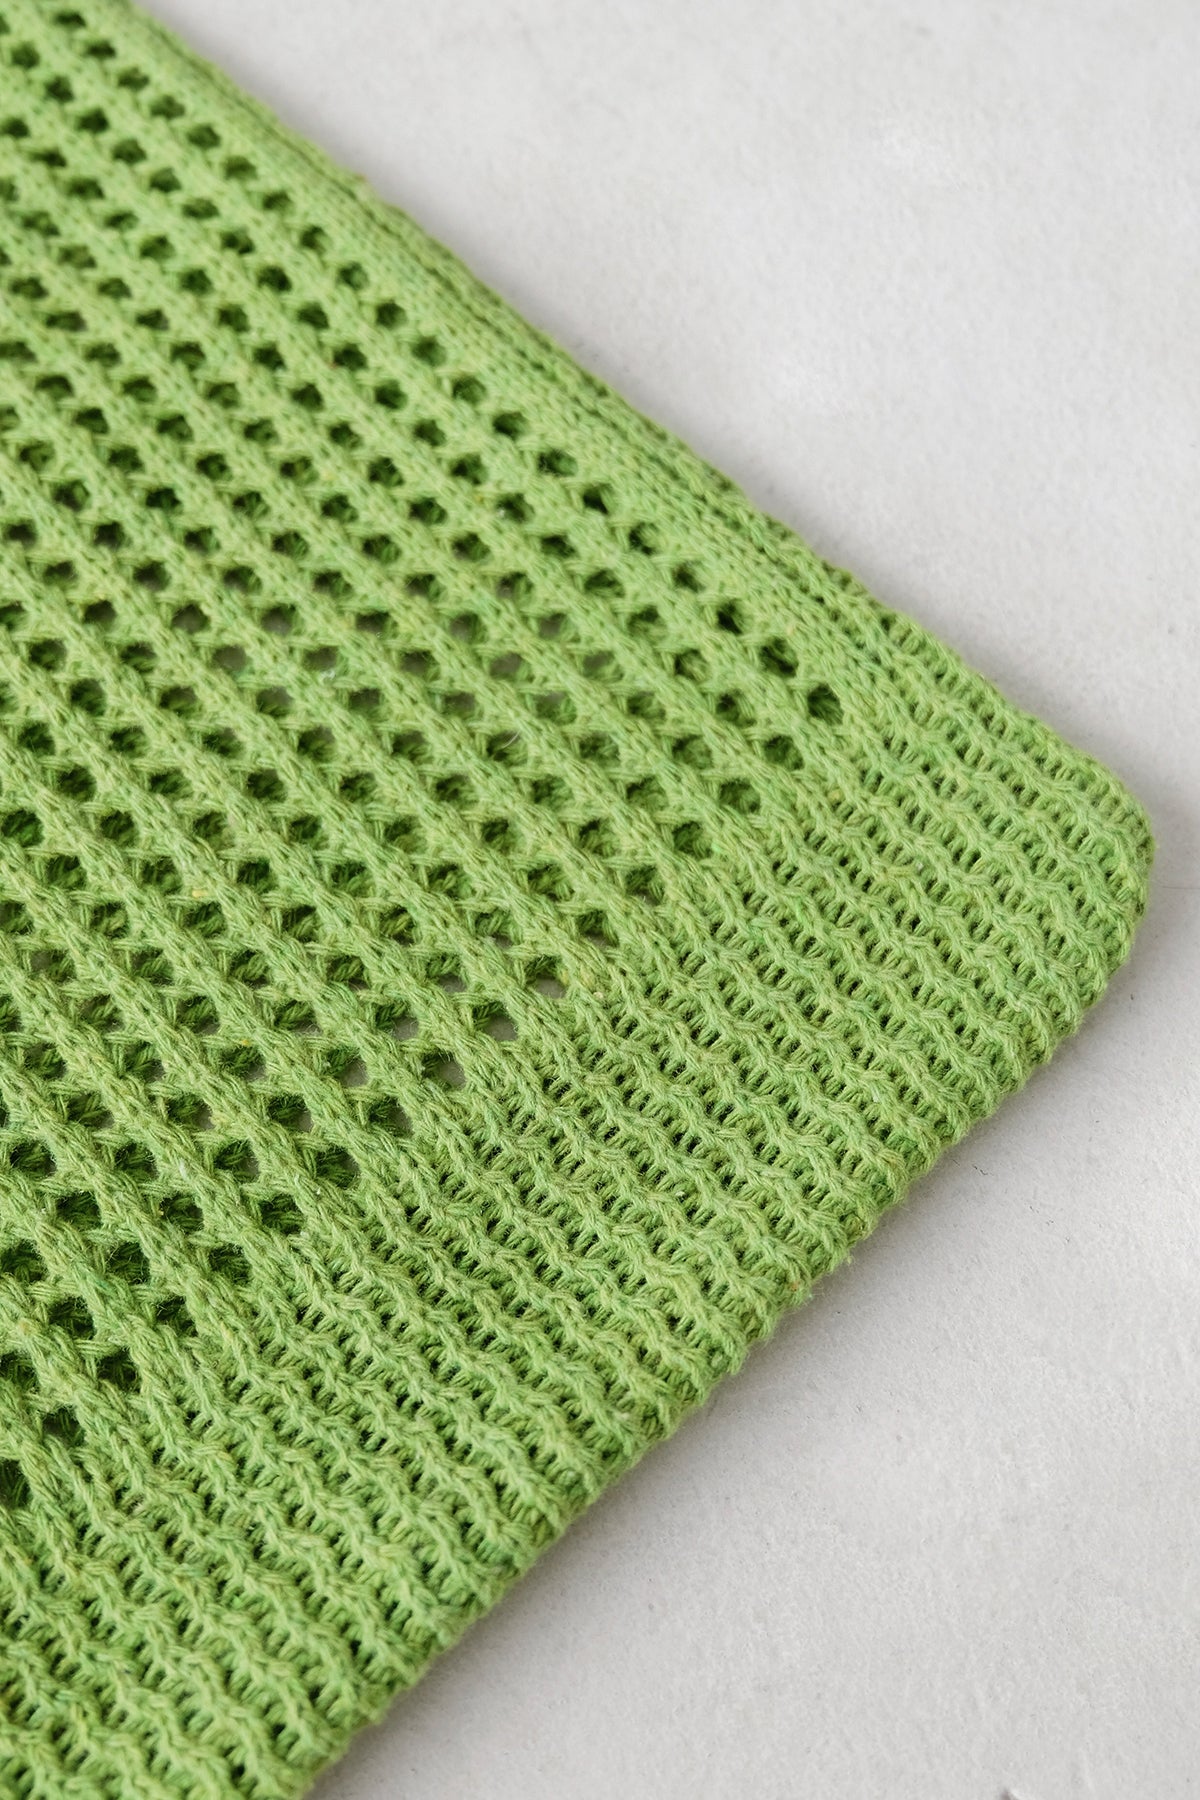 Terry Knit Tote Bag In Green (1 LEFT)